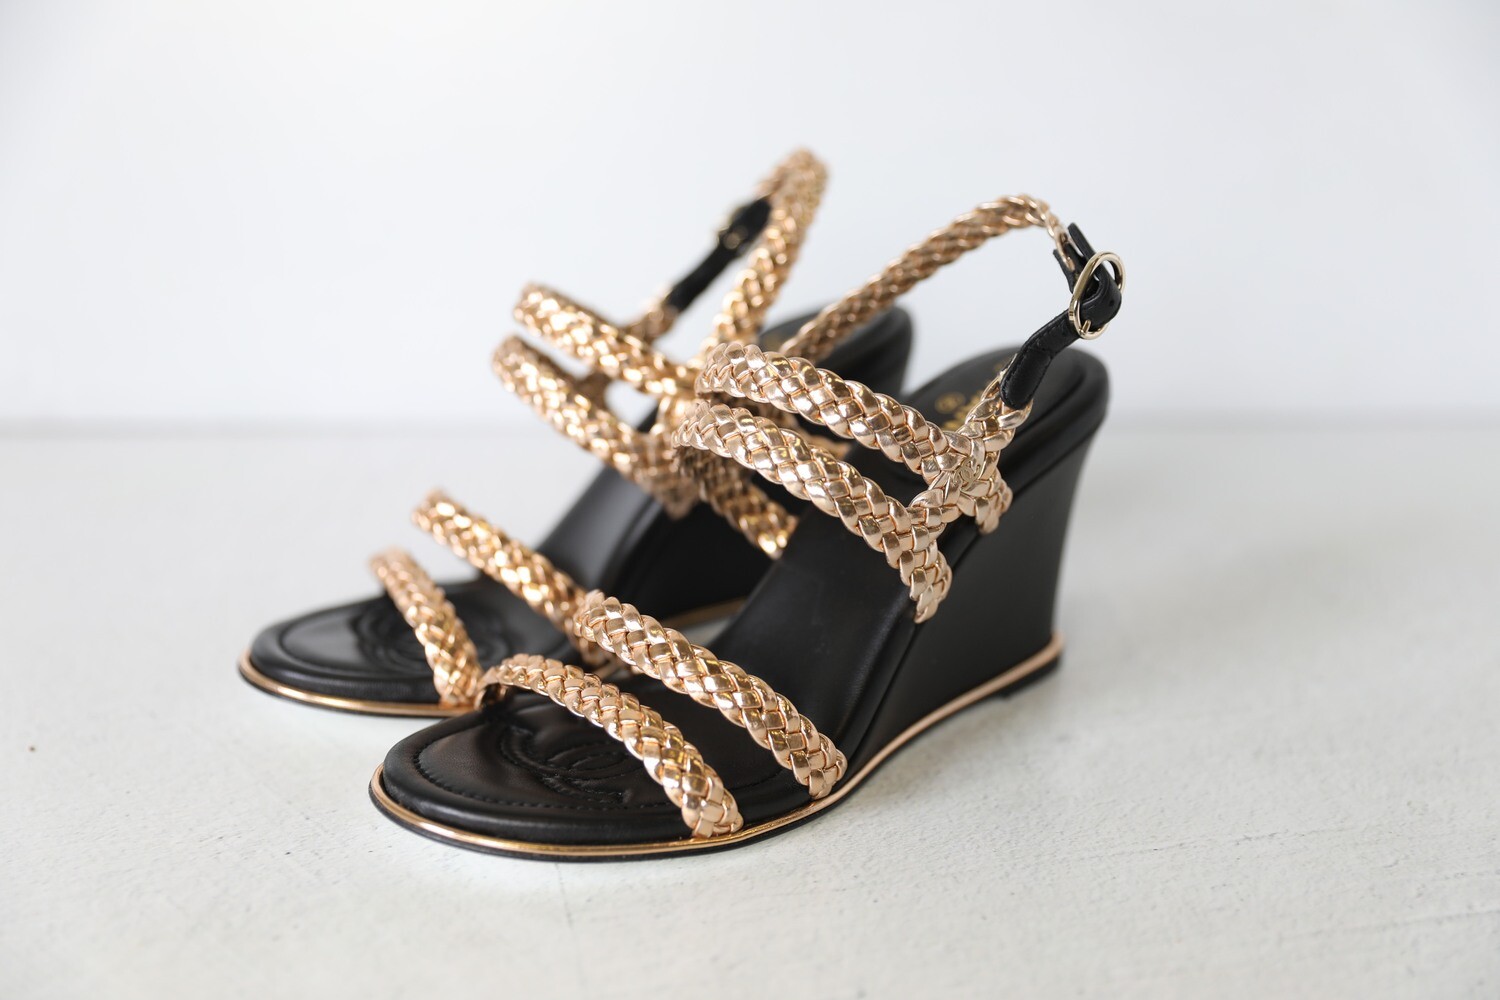 Chanel Wedge Sandals with Golden Braided Straps, Size 35.5, New in Box WA001